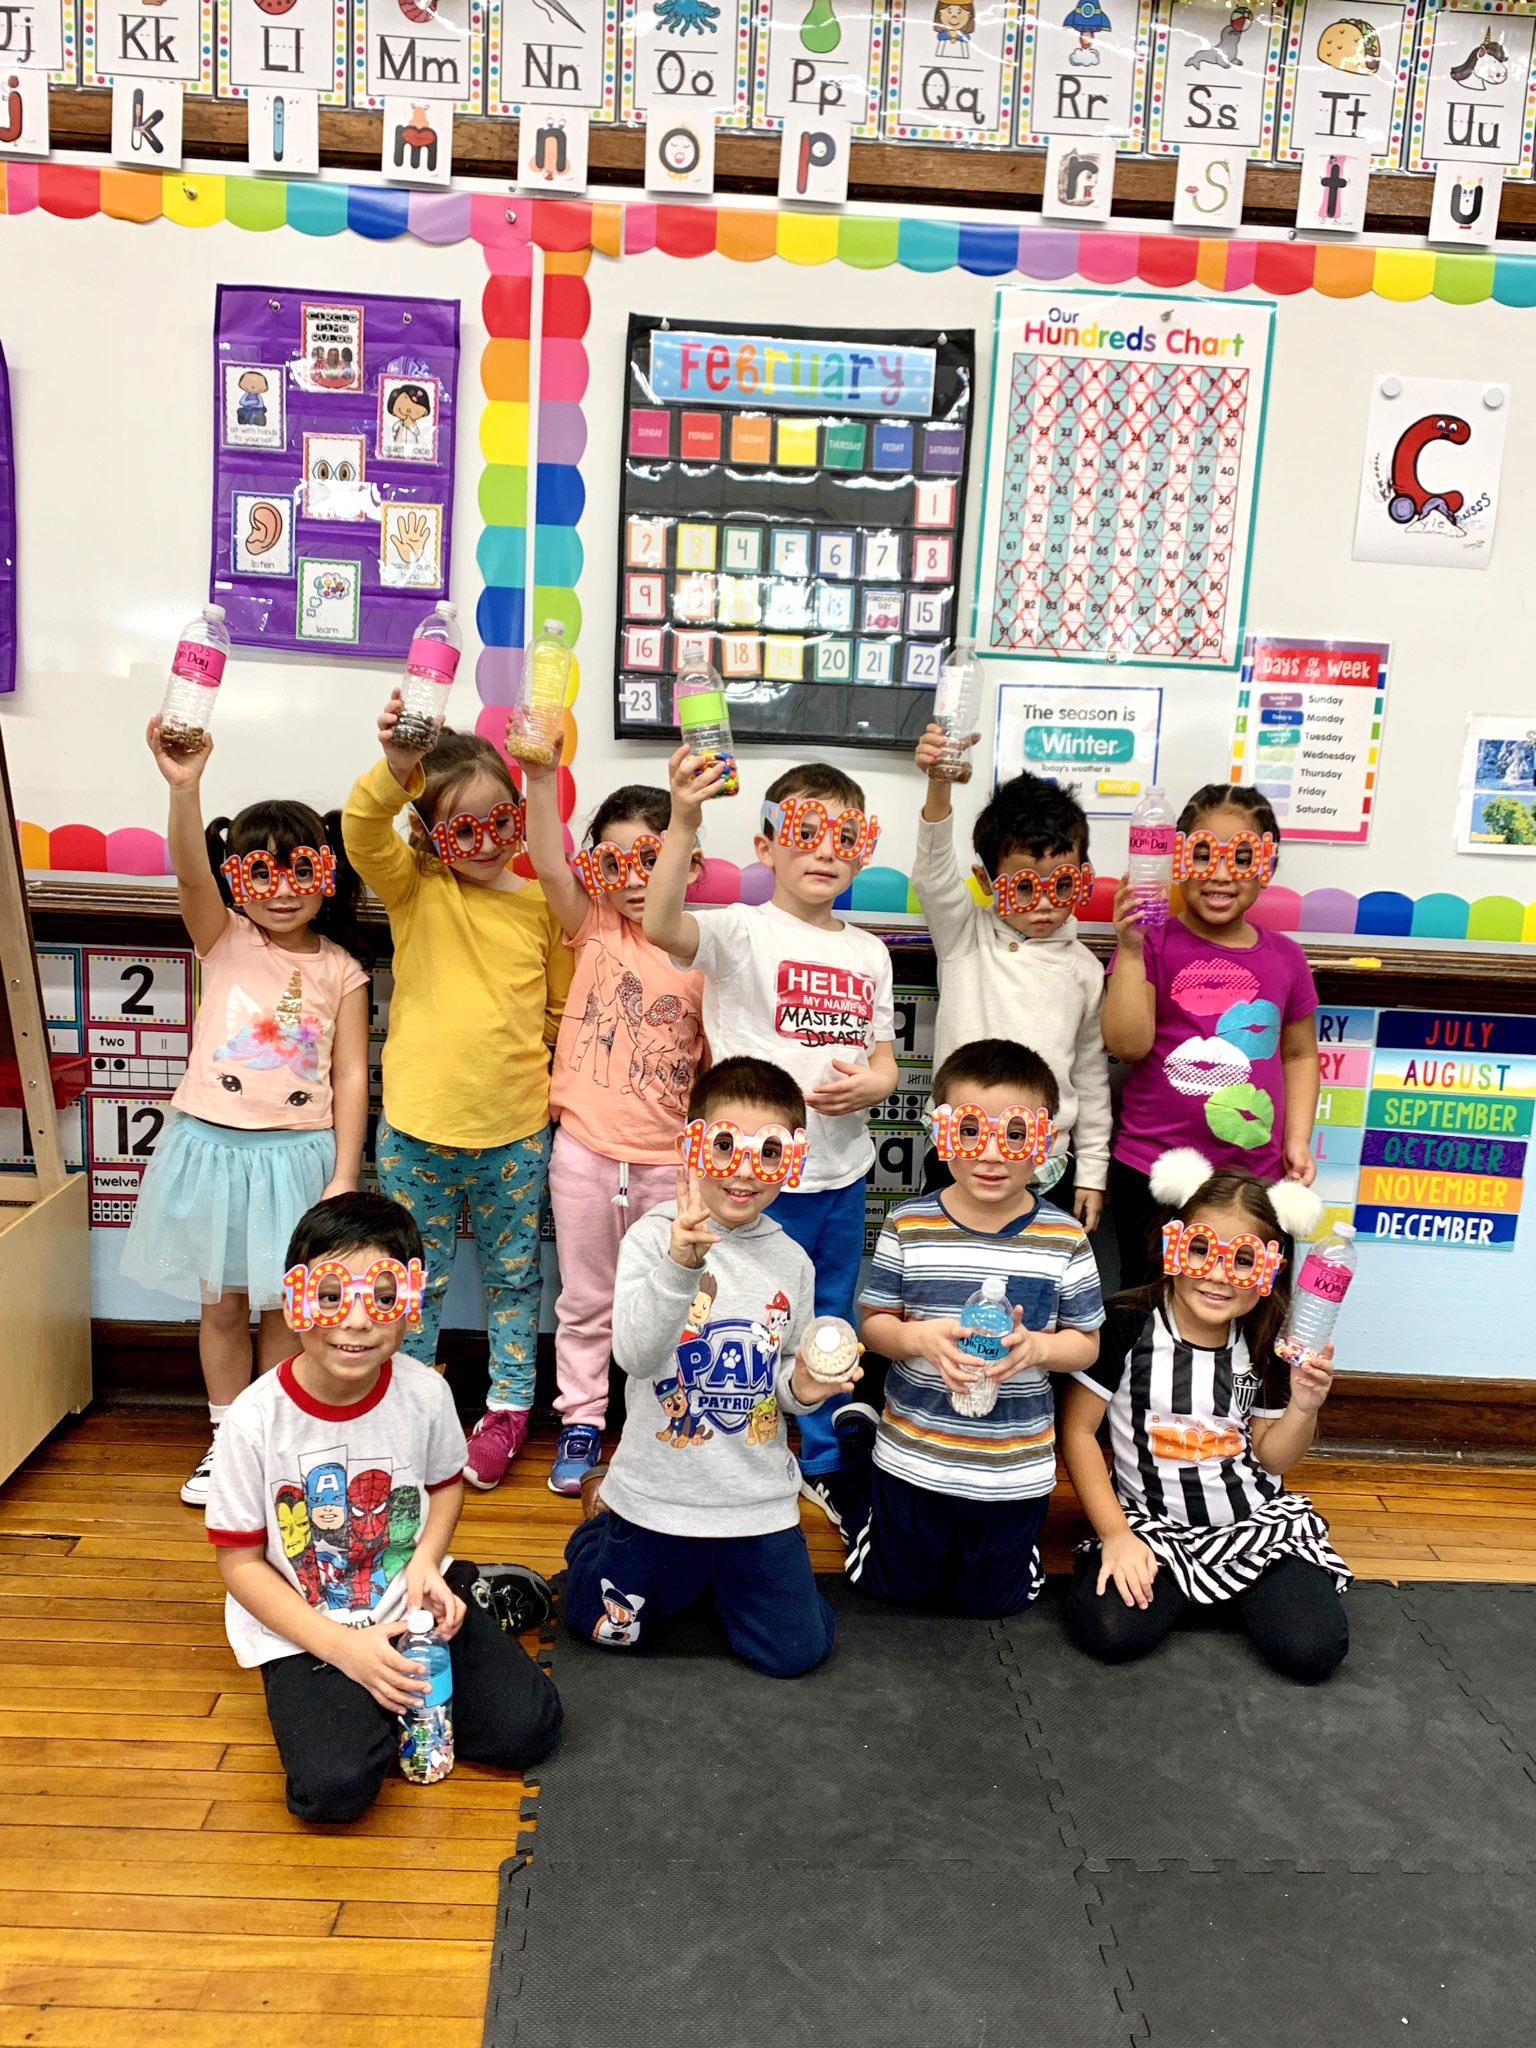 Pre-K students gather for a group photo inside a classroom